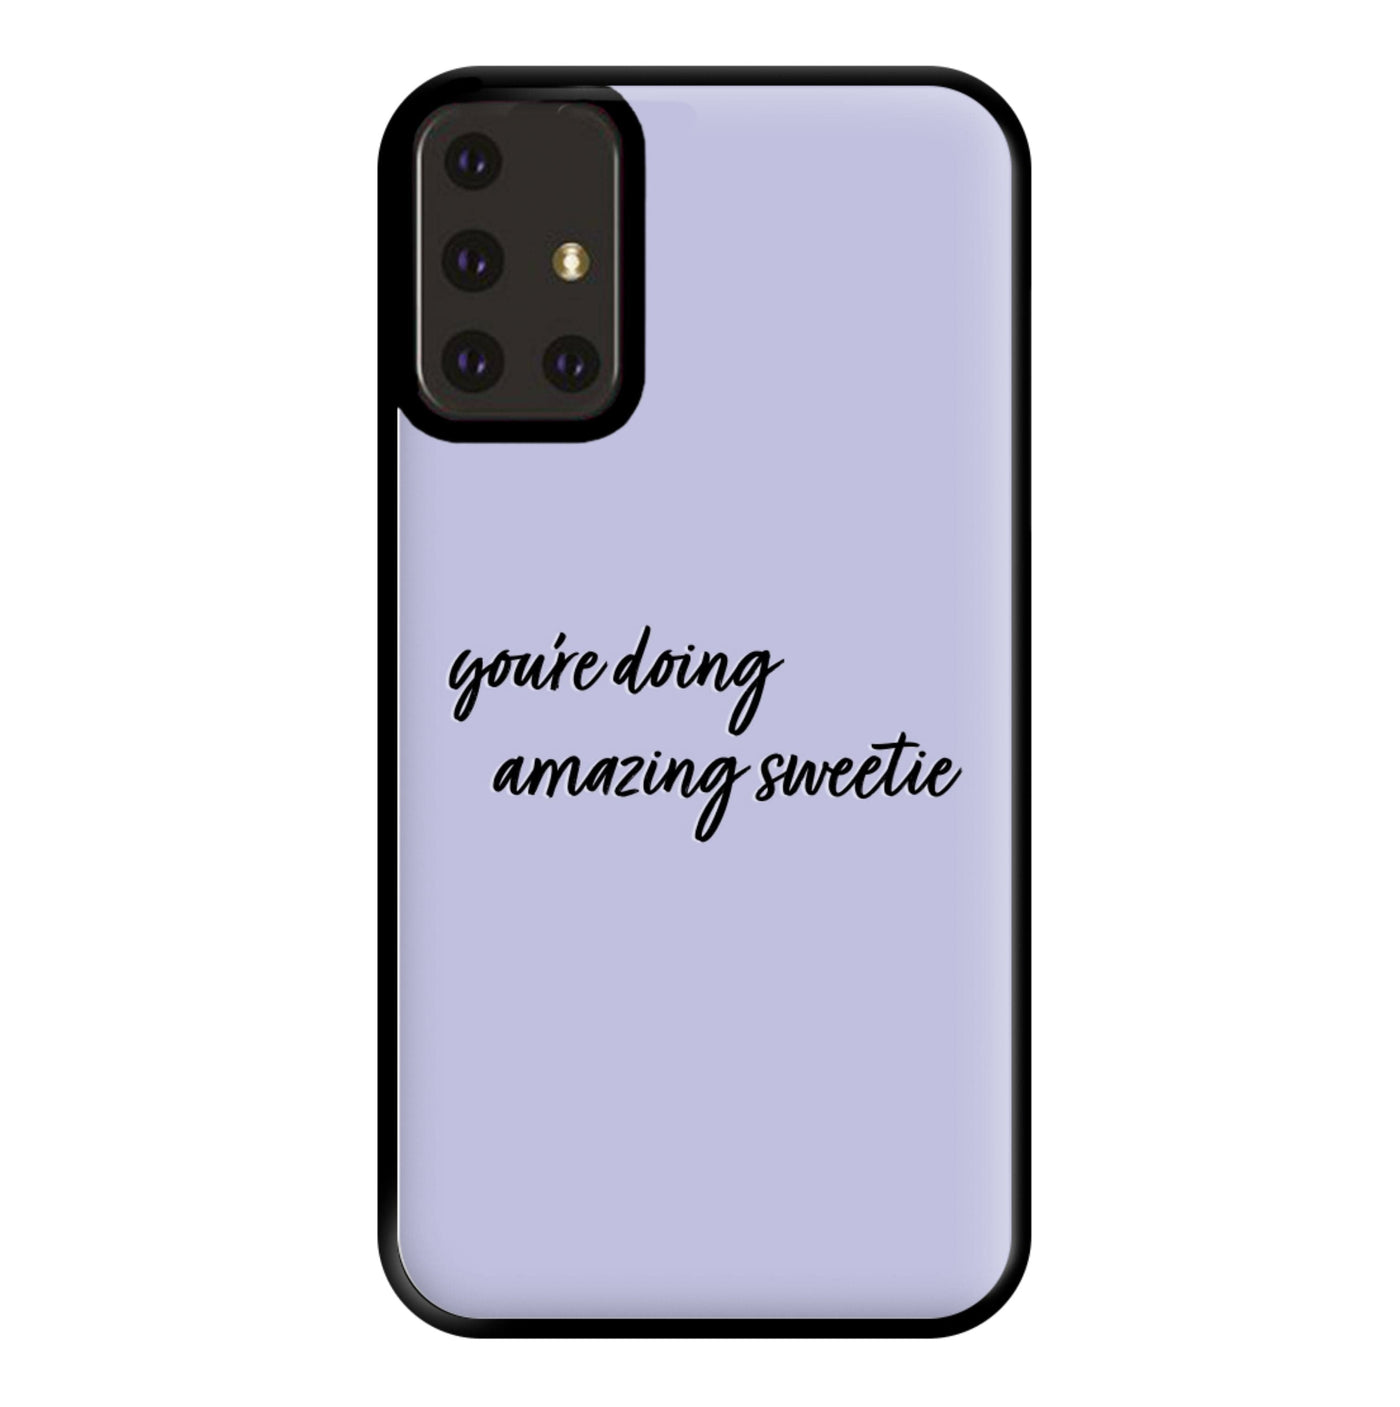 You're Doing Amazing Sweetie - Kris Jenner Phone Case